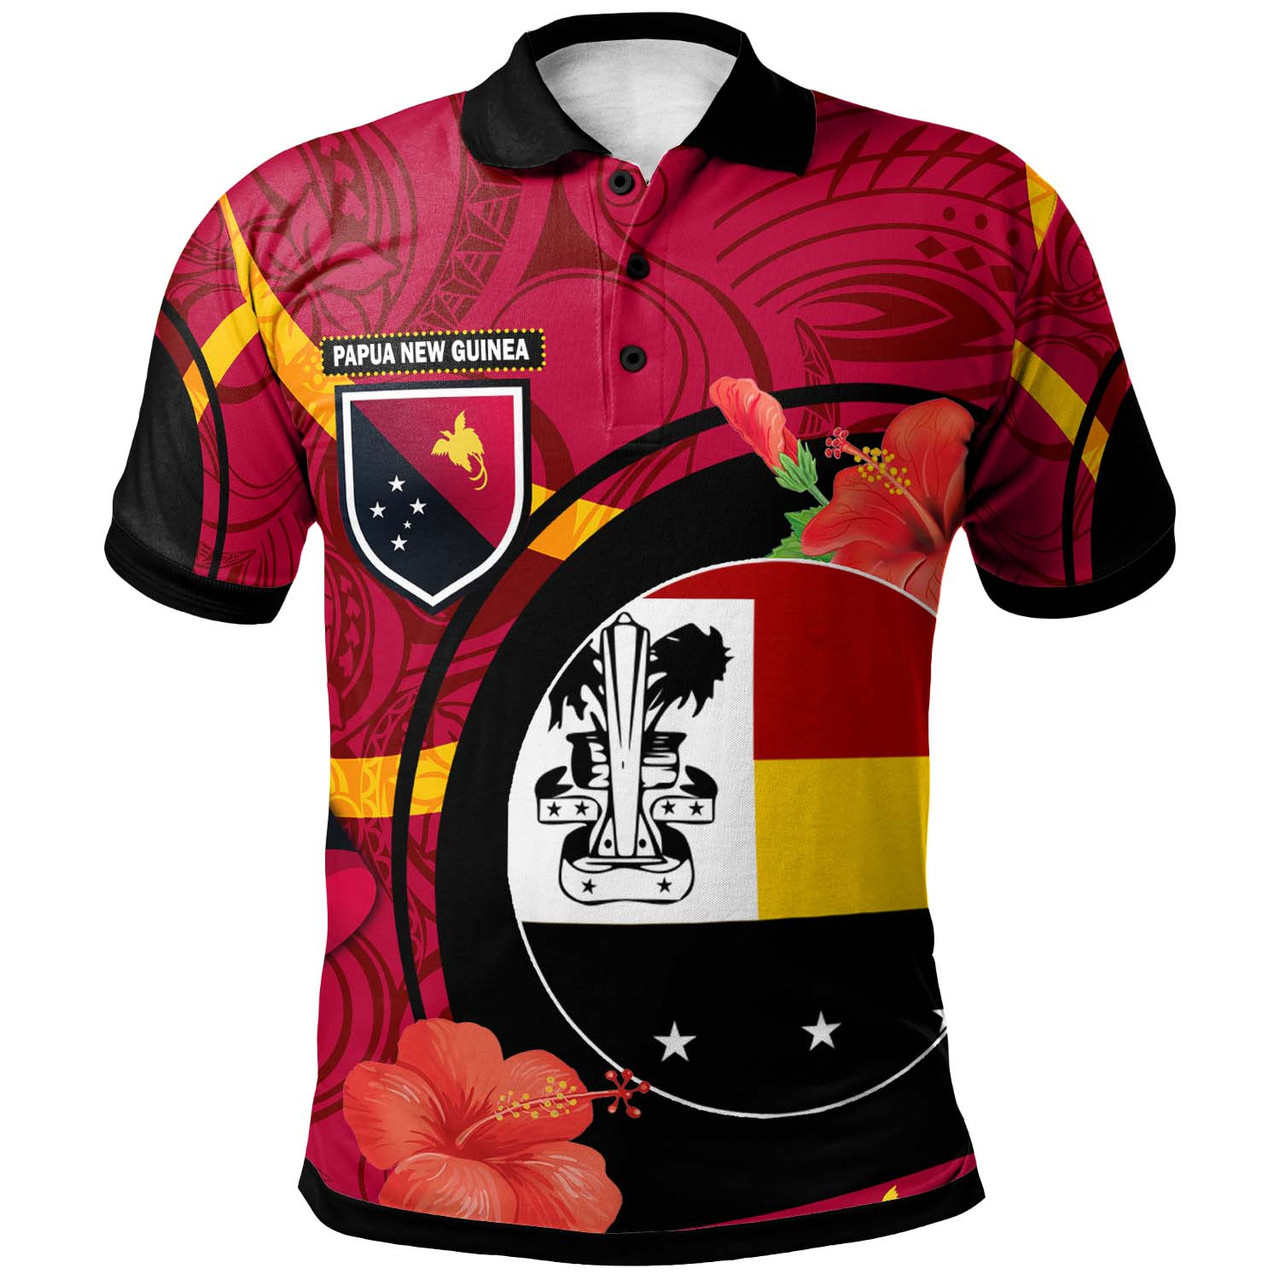 Papua New Guinea Polo Shirt - Madang Flag of PNG with Hibicus and Polynesian Culture Polo Shirt